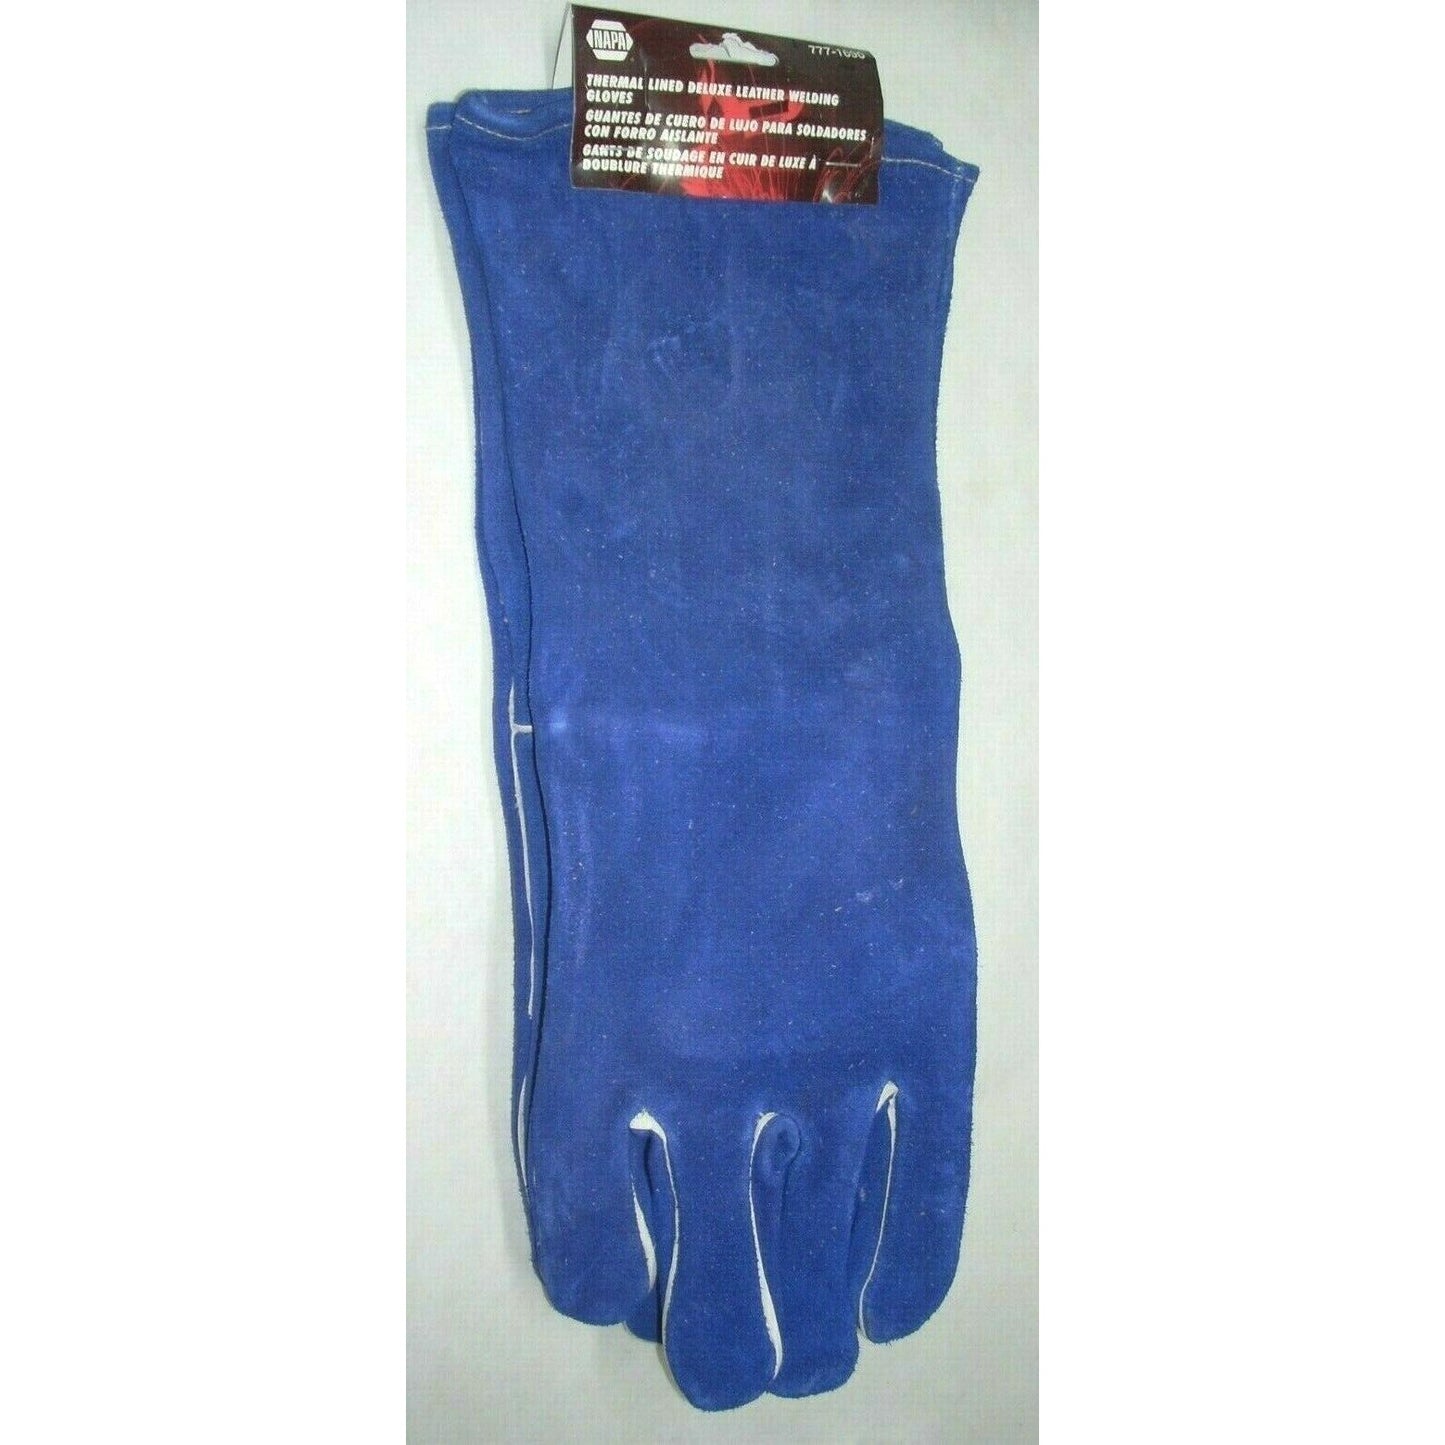 Napa 777-1690 Blue Welding Gloves 16" Long Thermal Insulated Men's Size Large